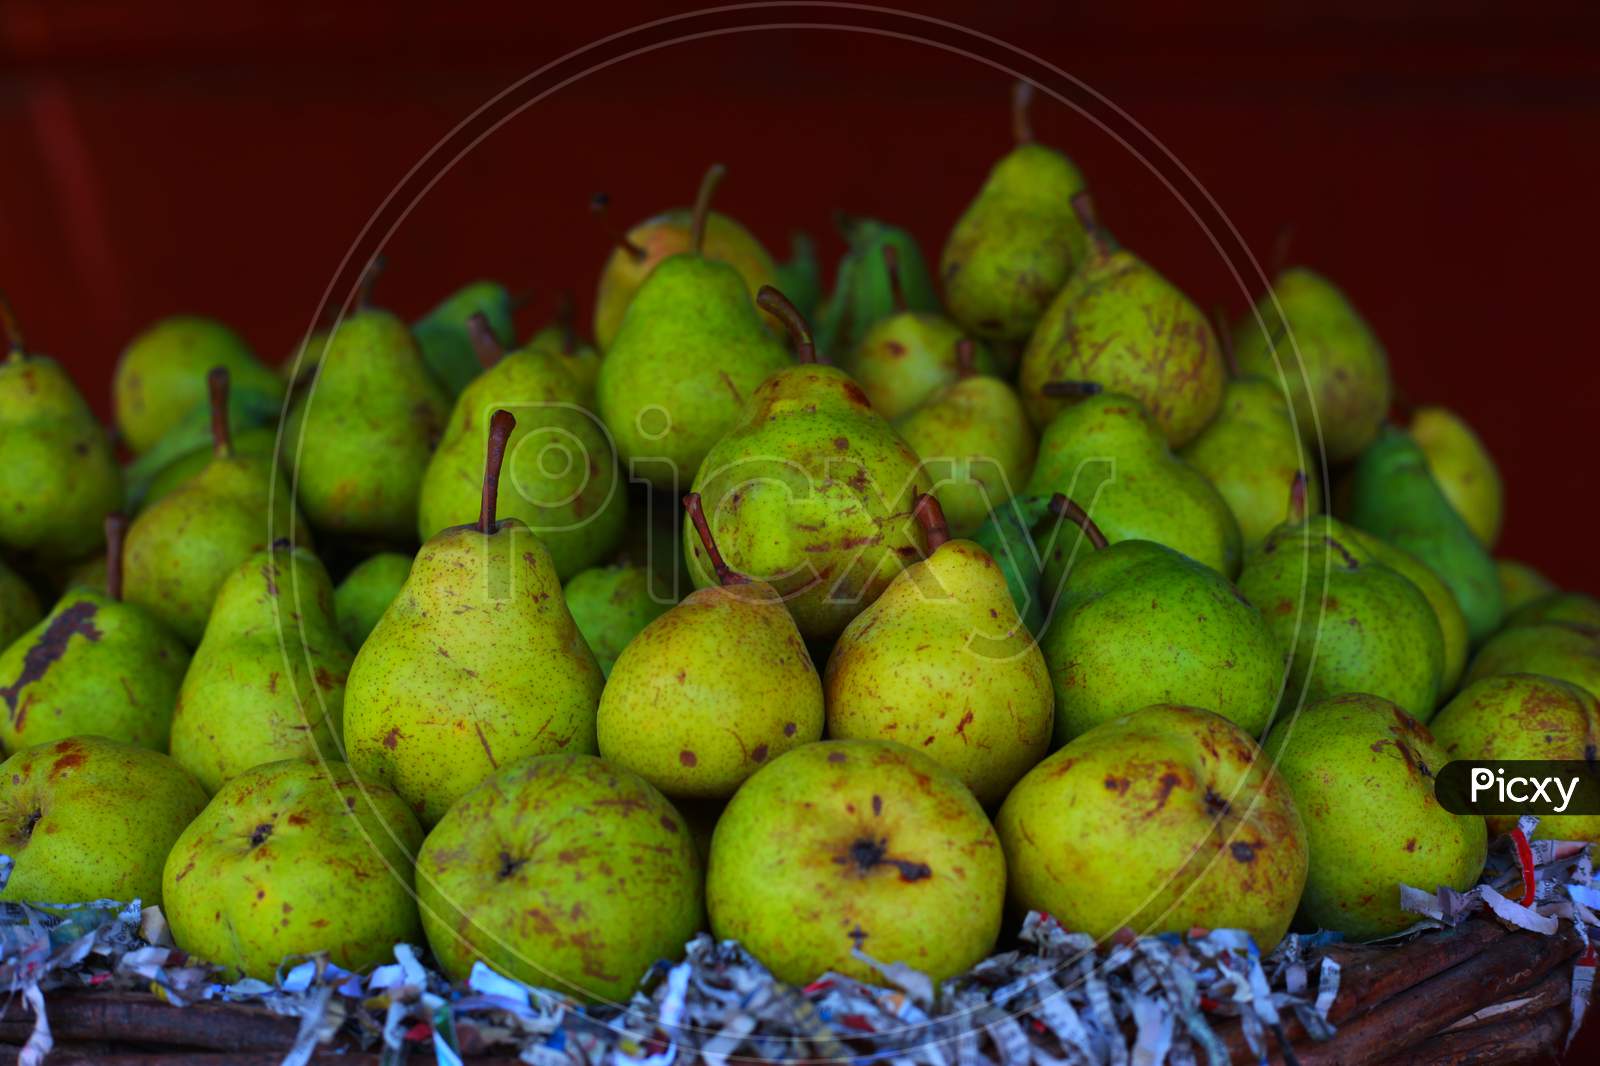 One of the tasty fruits pear